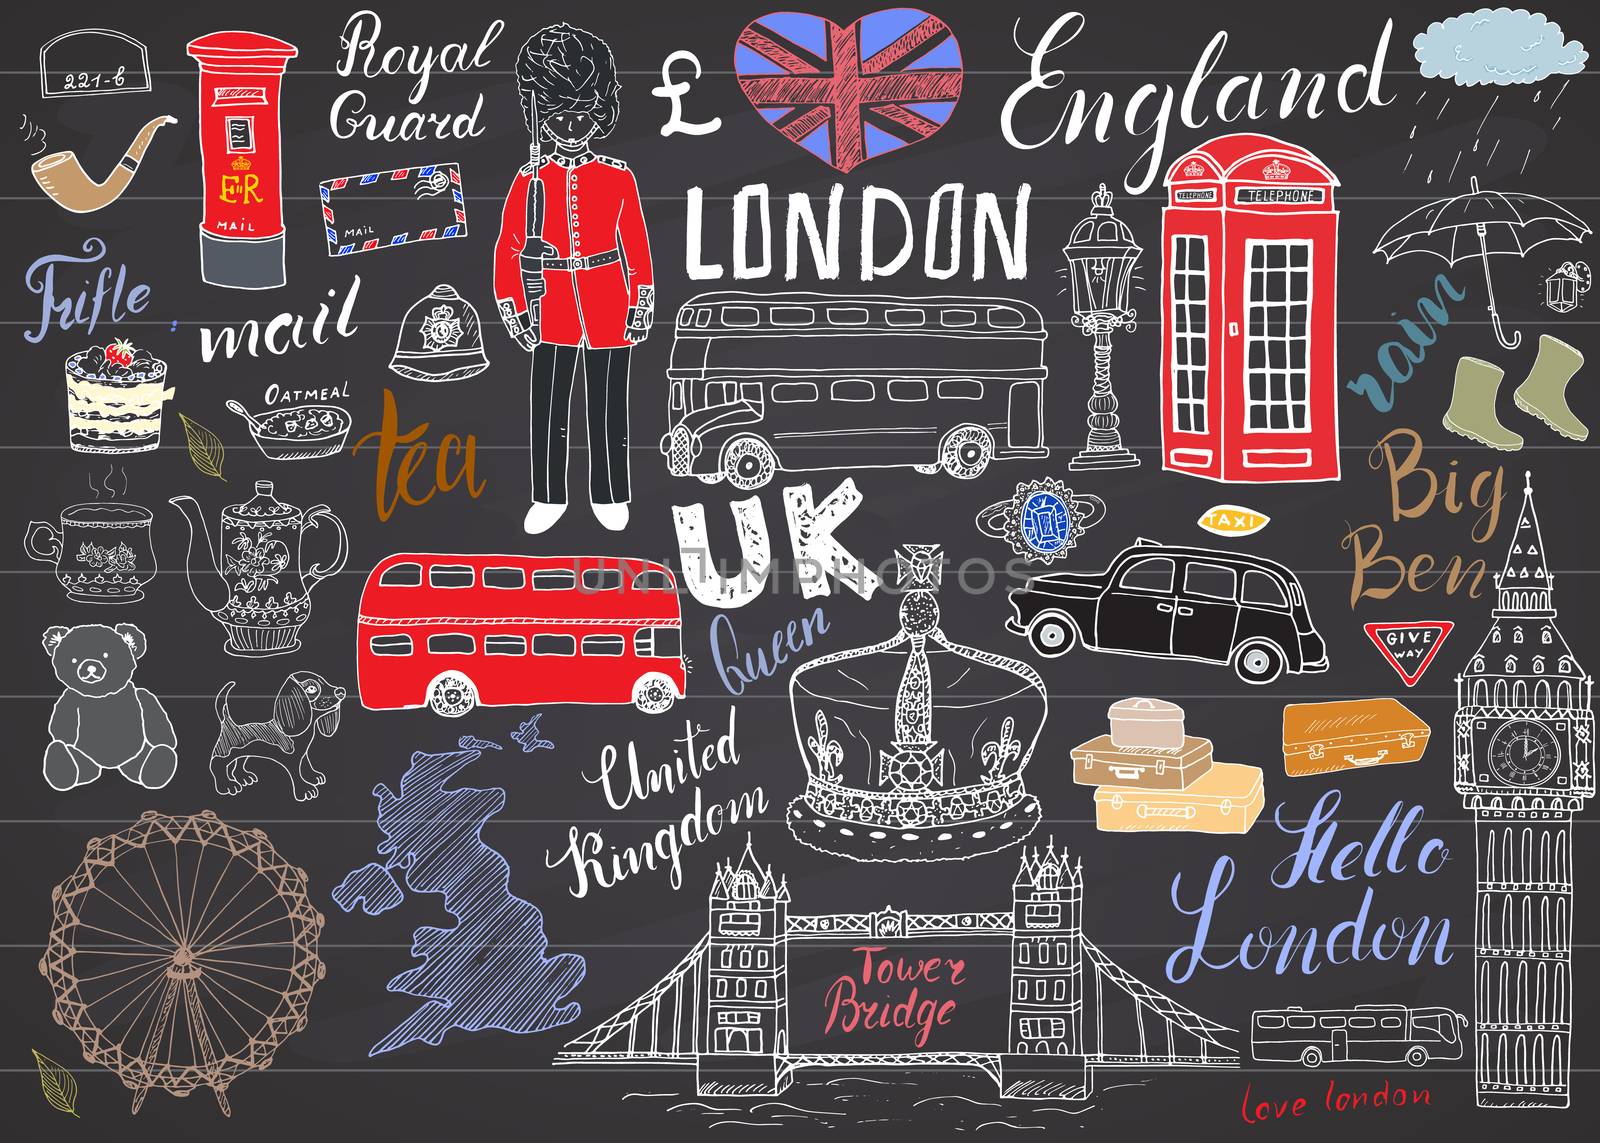 London city doodles elements collection. Hand drawn set with, tower bridge, crown, big ben, royal guard, red bus, UK map and flag, tea pot, lettering, vector illustration on chalkboard.